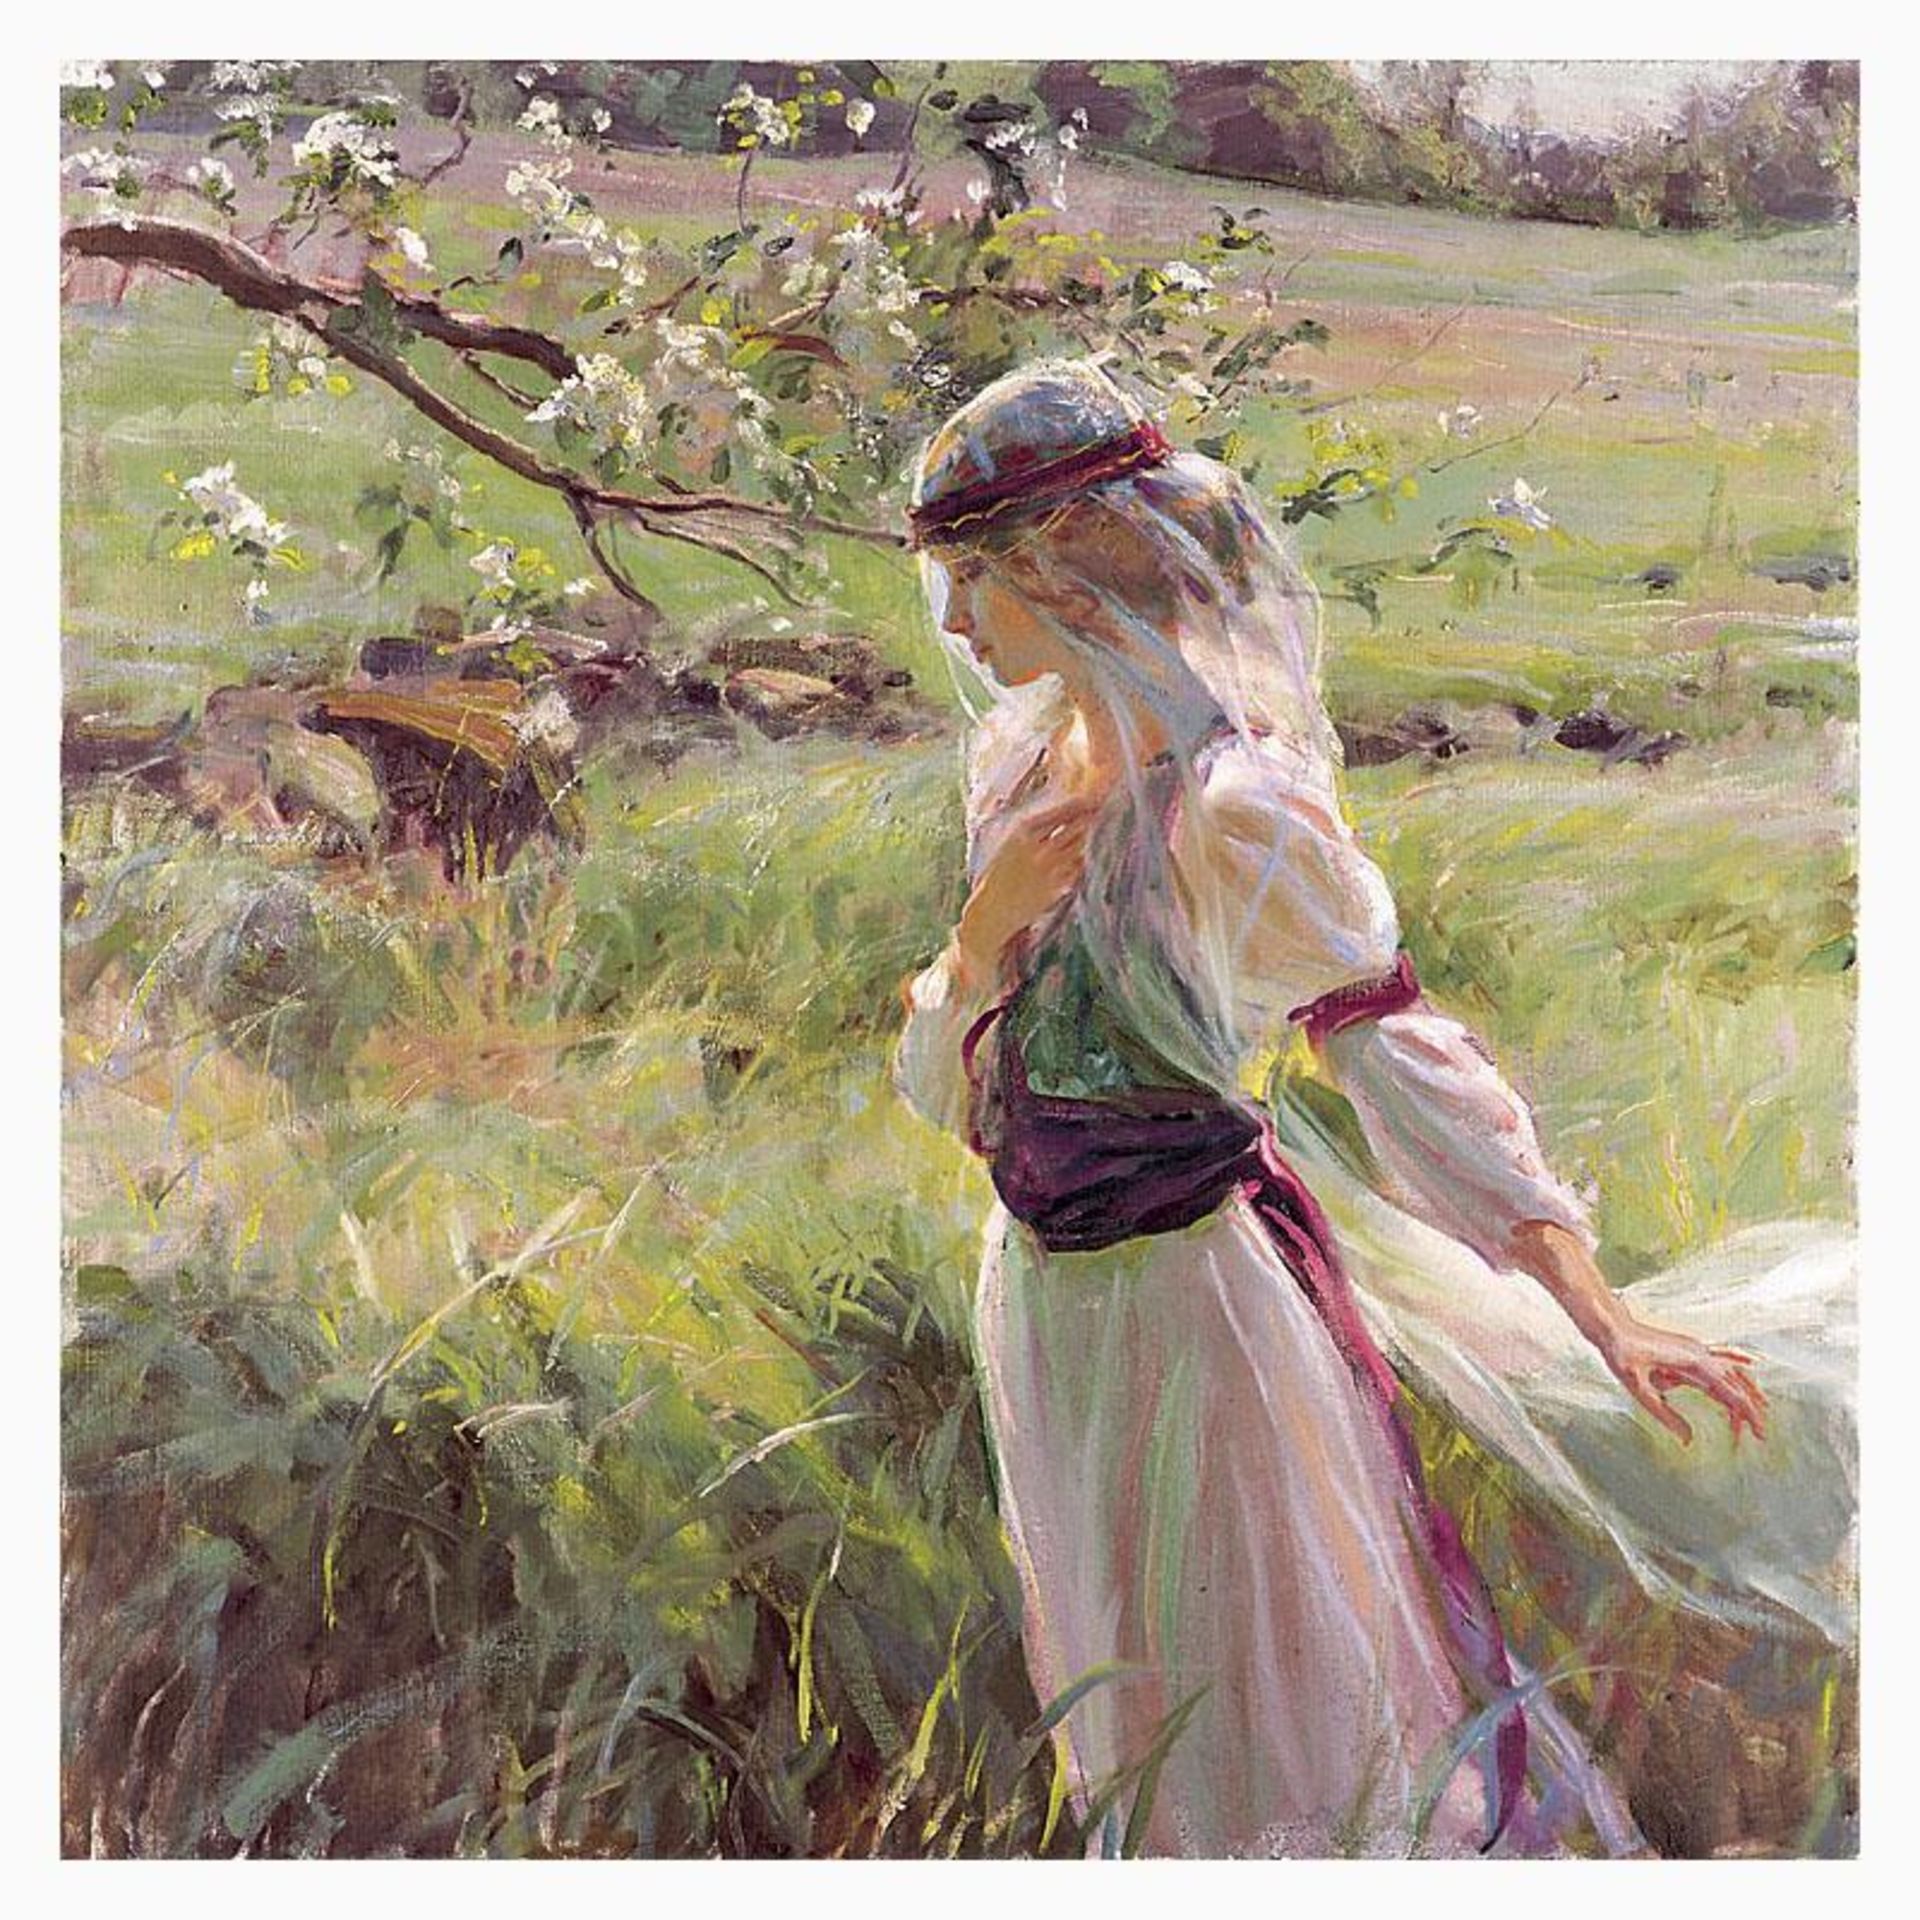 Dan Gerhartz, "Extending Grace" Limited Edition on Canvas, Numbered and Hand Sig